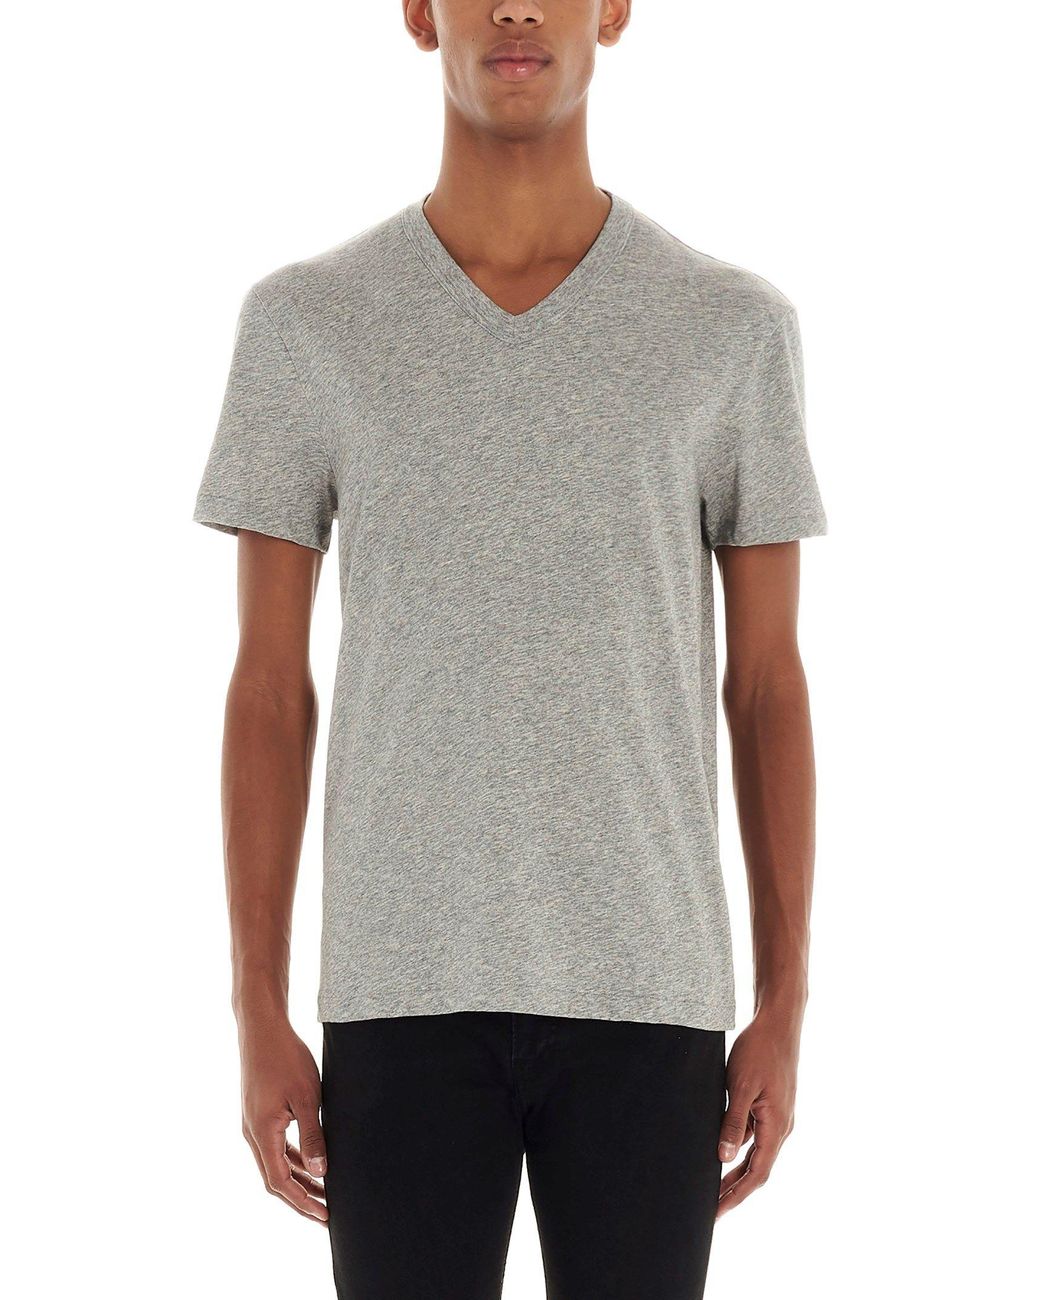 Tom Ford Cotton T-shirt in Grey (Gray) for Men - Lyst